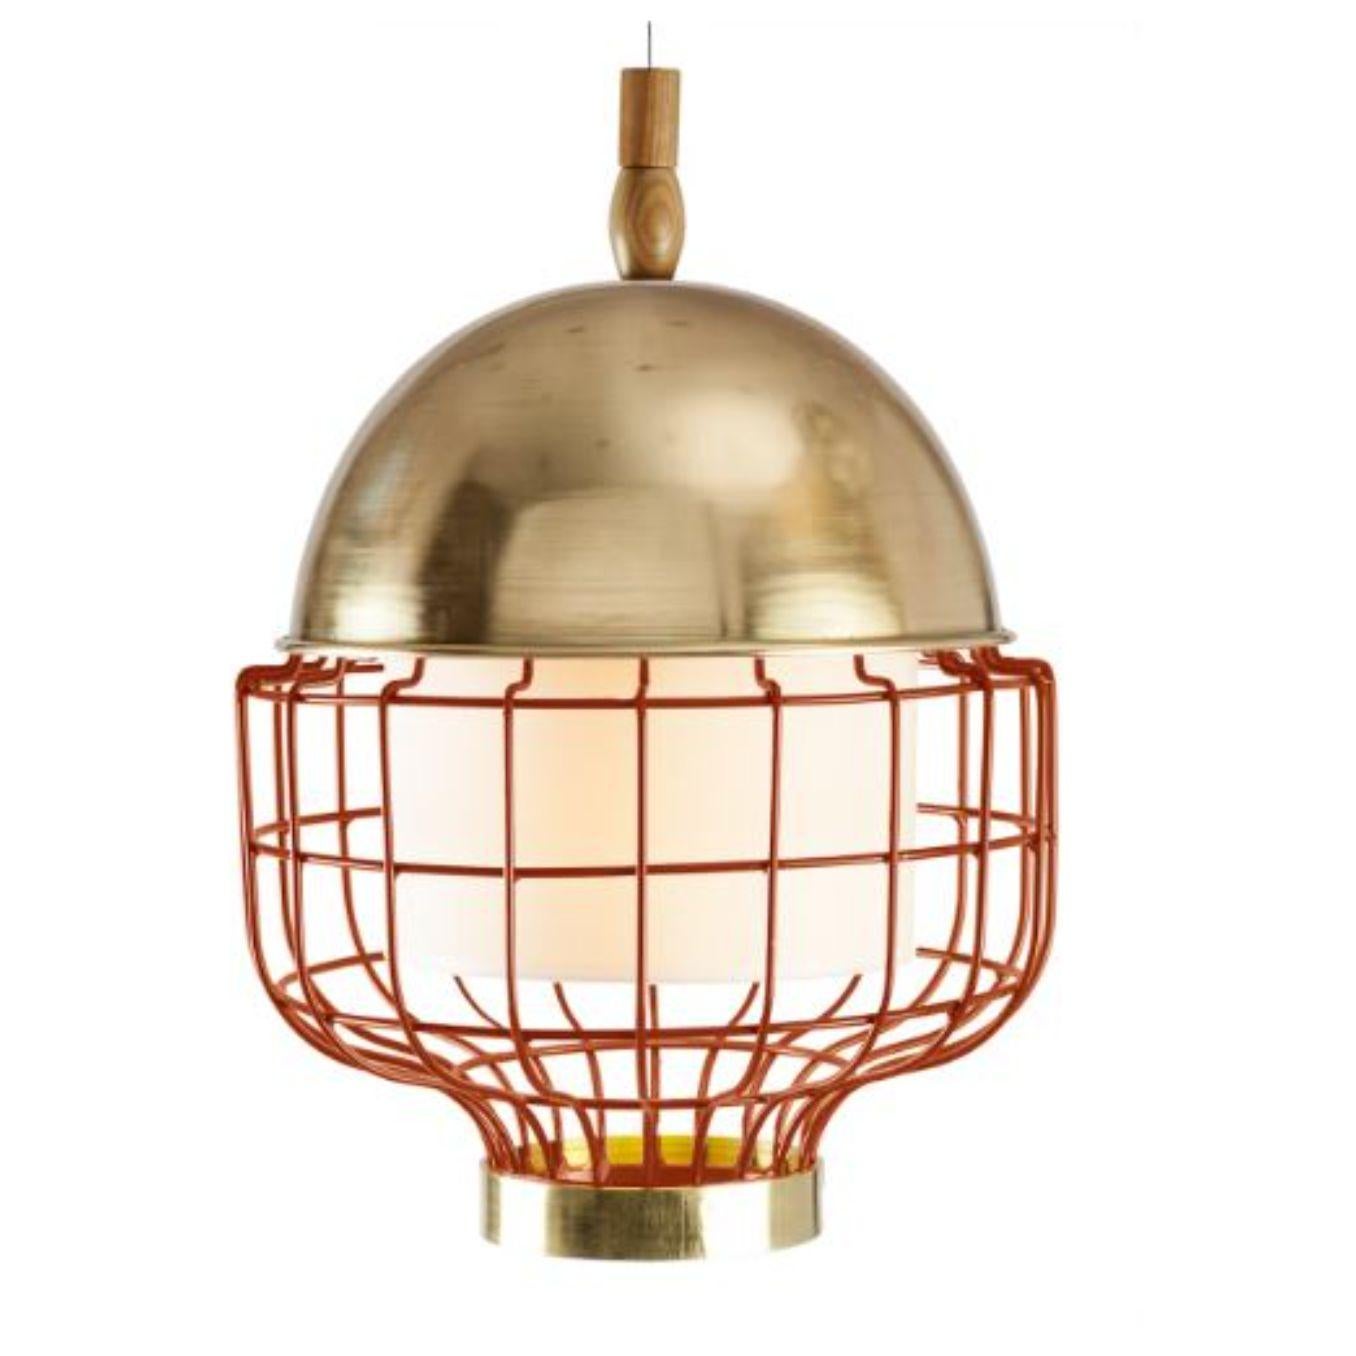 Brass copper magnolia III suspension lamp with brass ring by Dooq.
Dimensions: W 31 x D 31 x H 42 cm.
Materials: lacquered metal, polished or brushed metal, brass.
abat-jour: cotton
Also available in different colours and